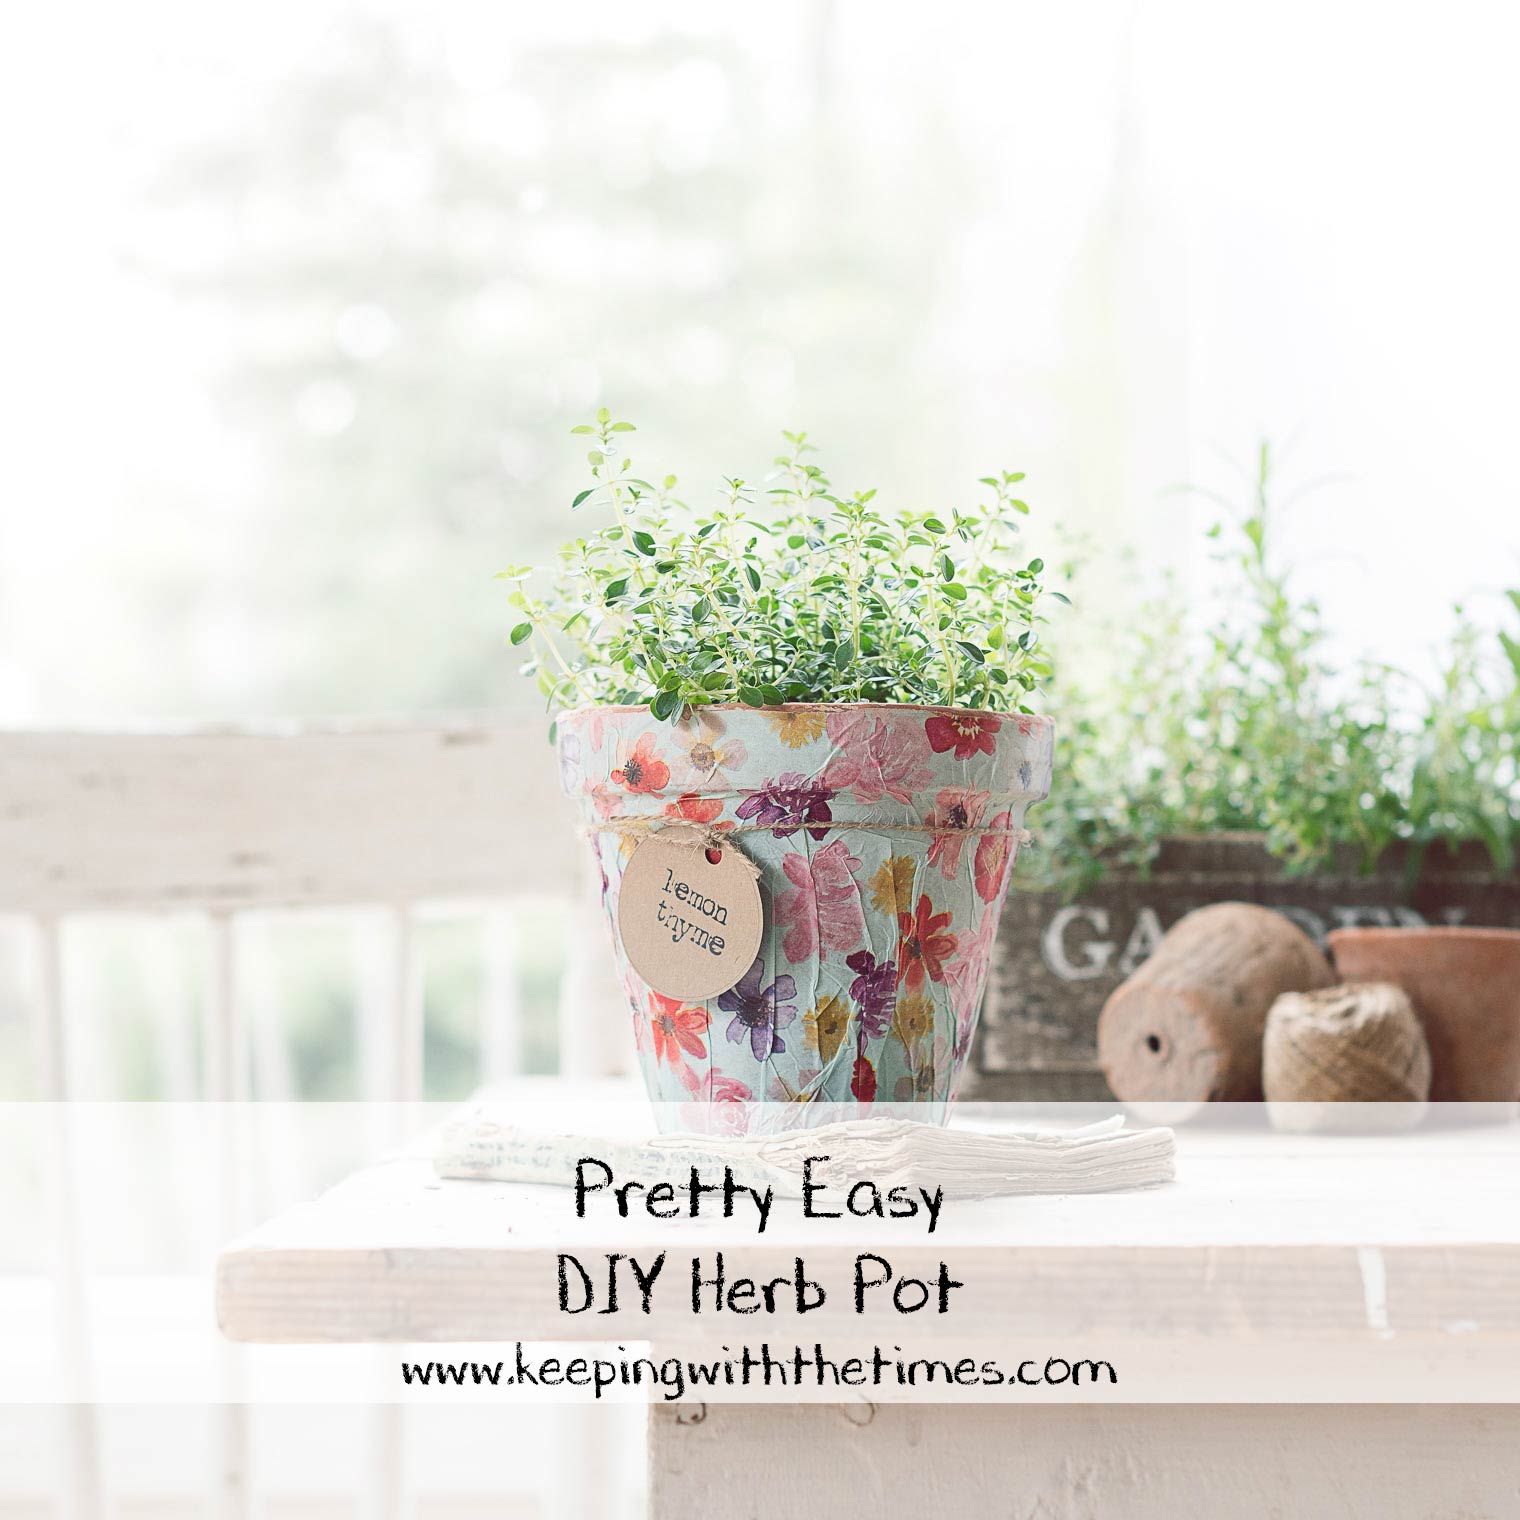 Pretty Easy DIY Herb Pot, Keeping With the Times